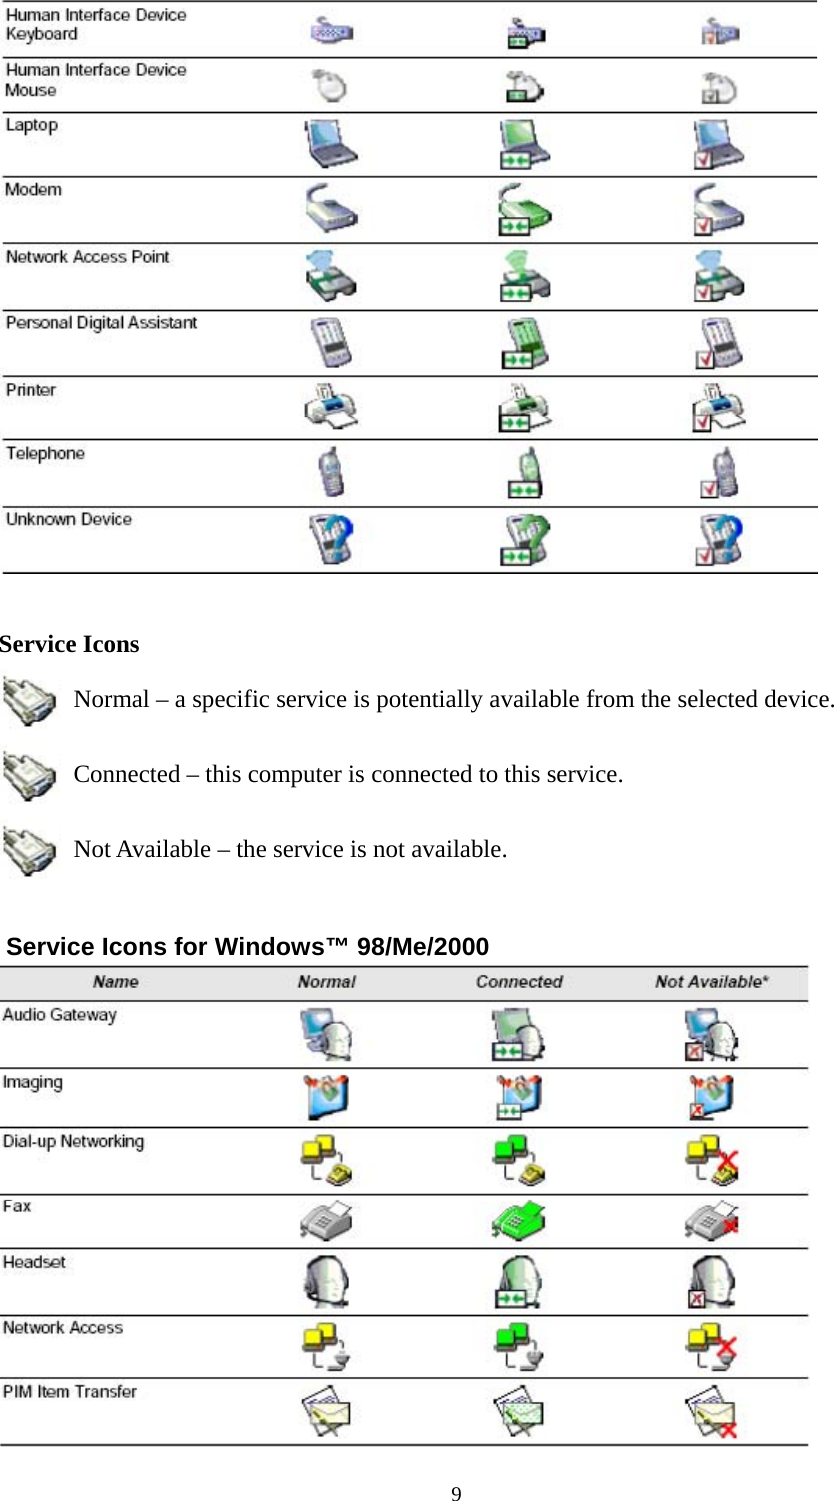   9  Service Icons   Normal – a specific service is potentially available from the selected device.   Connected – this computer is connected to this service.   Not Available – the service is not available.  Service Icons for Windows™ 98/Me/2000   